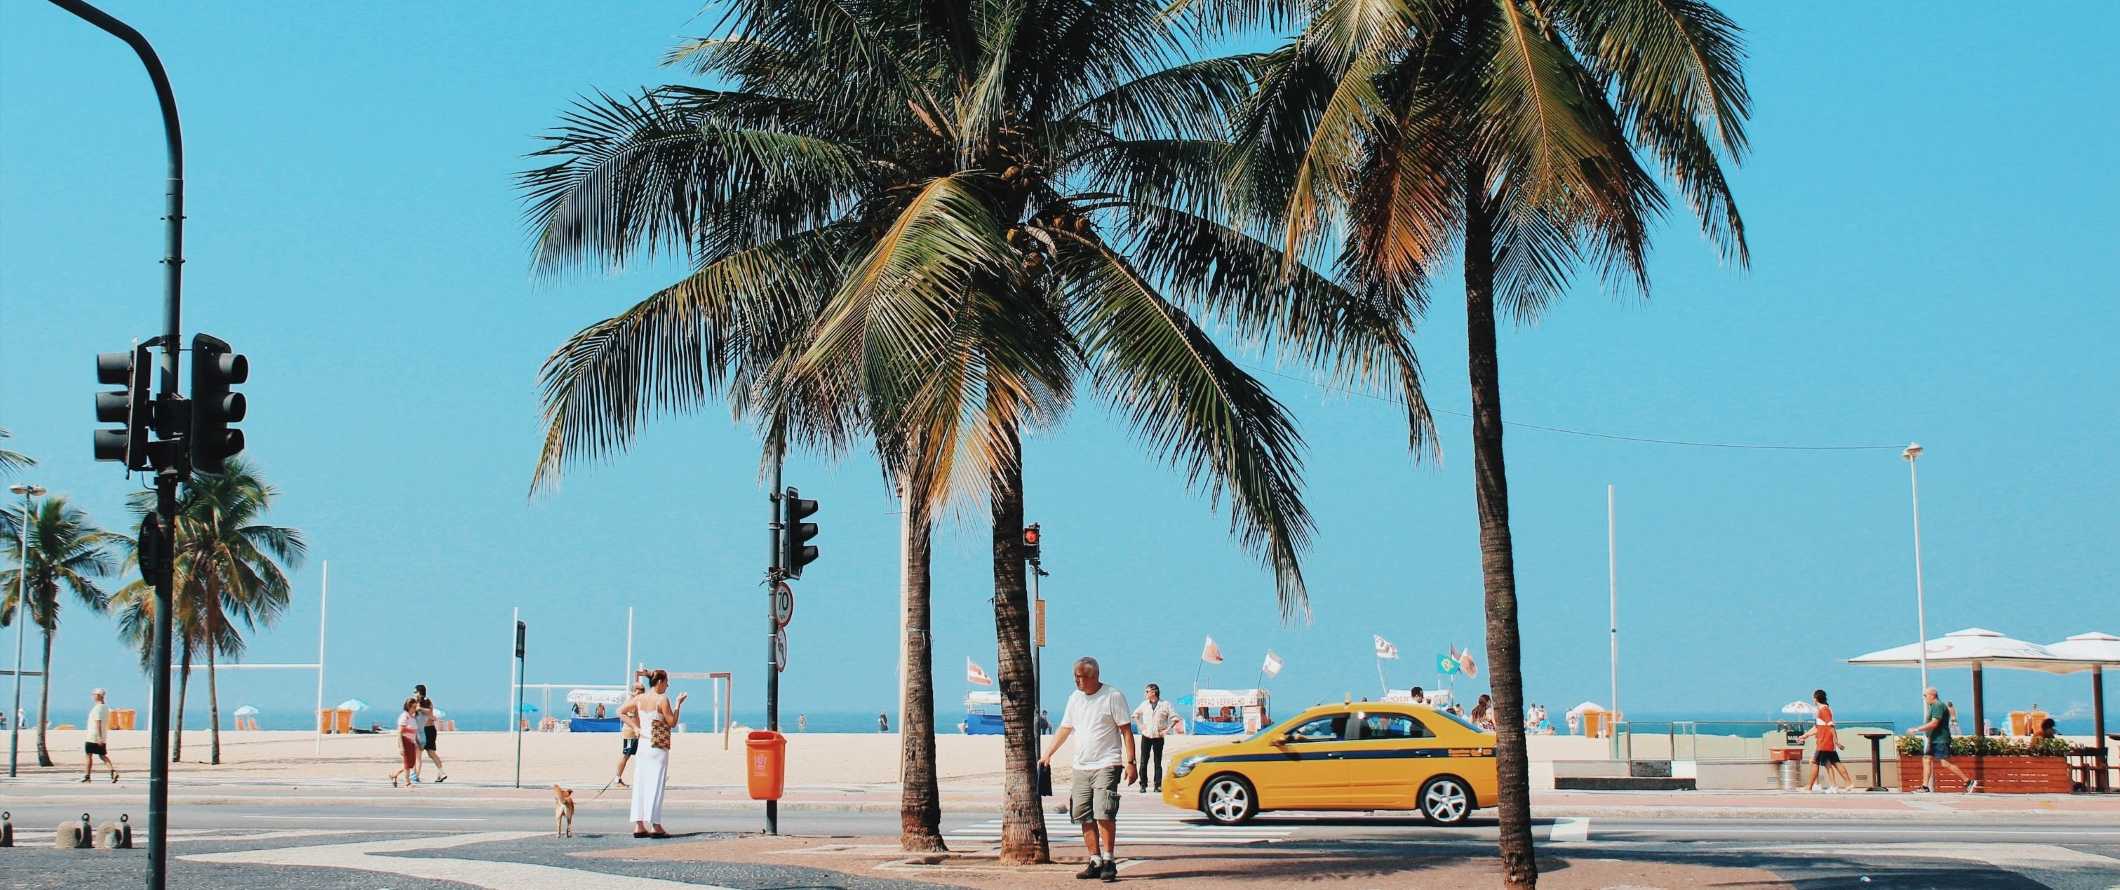 People walking down a palm tree-lined street with a yellow taxi going by along the beach in Rio de Janeiro, Brazil